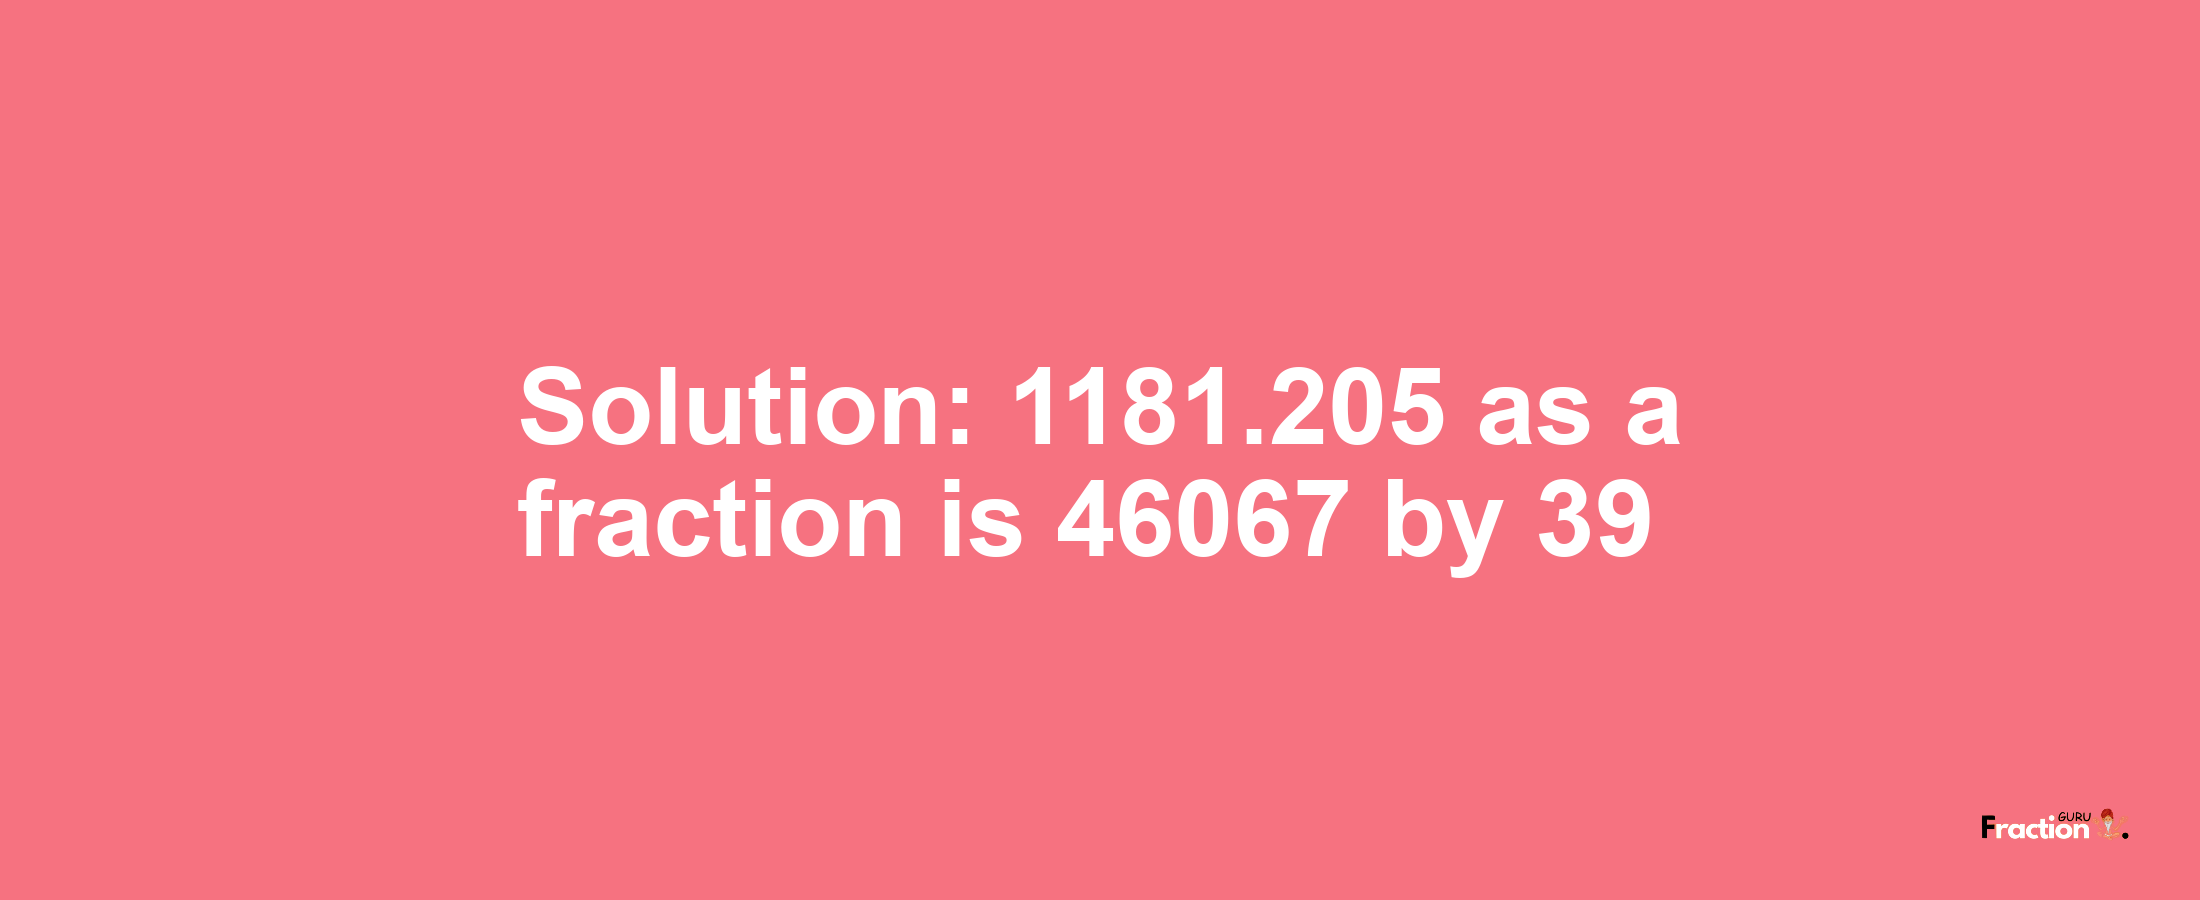 Solution:1181.205 as a fraction is 46067/39